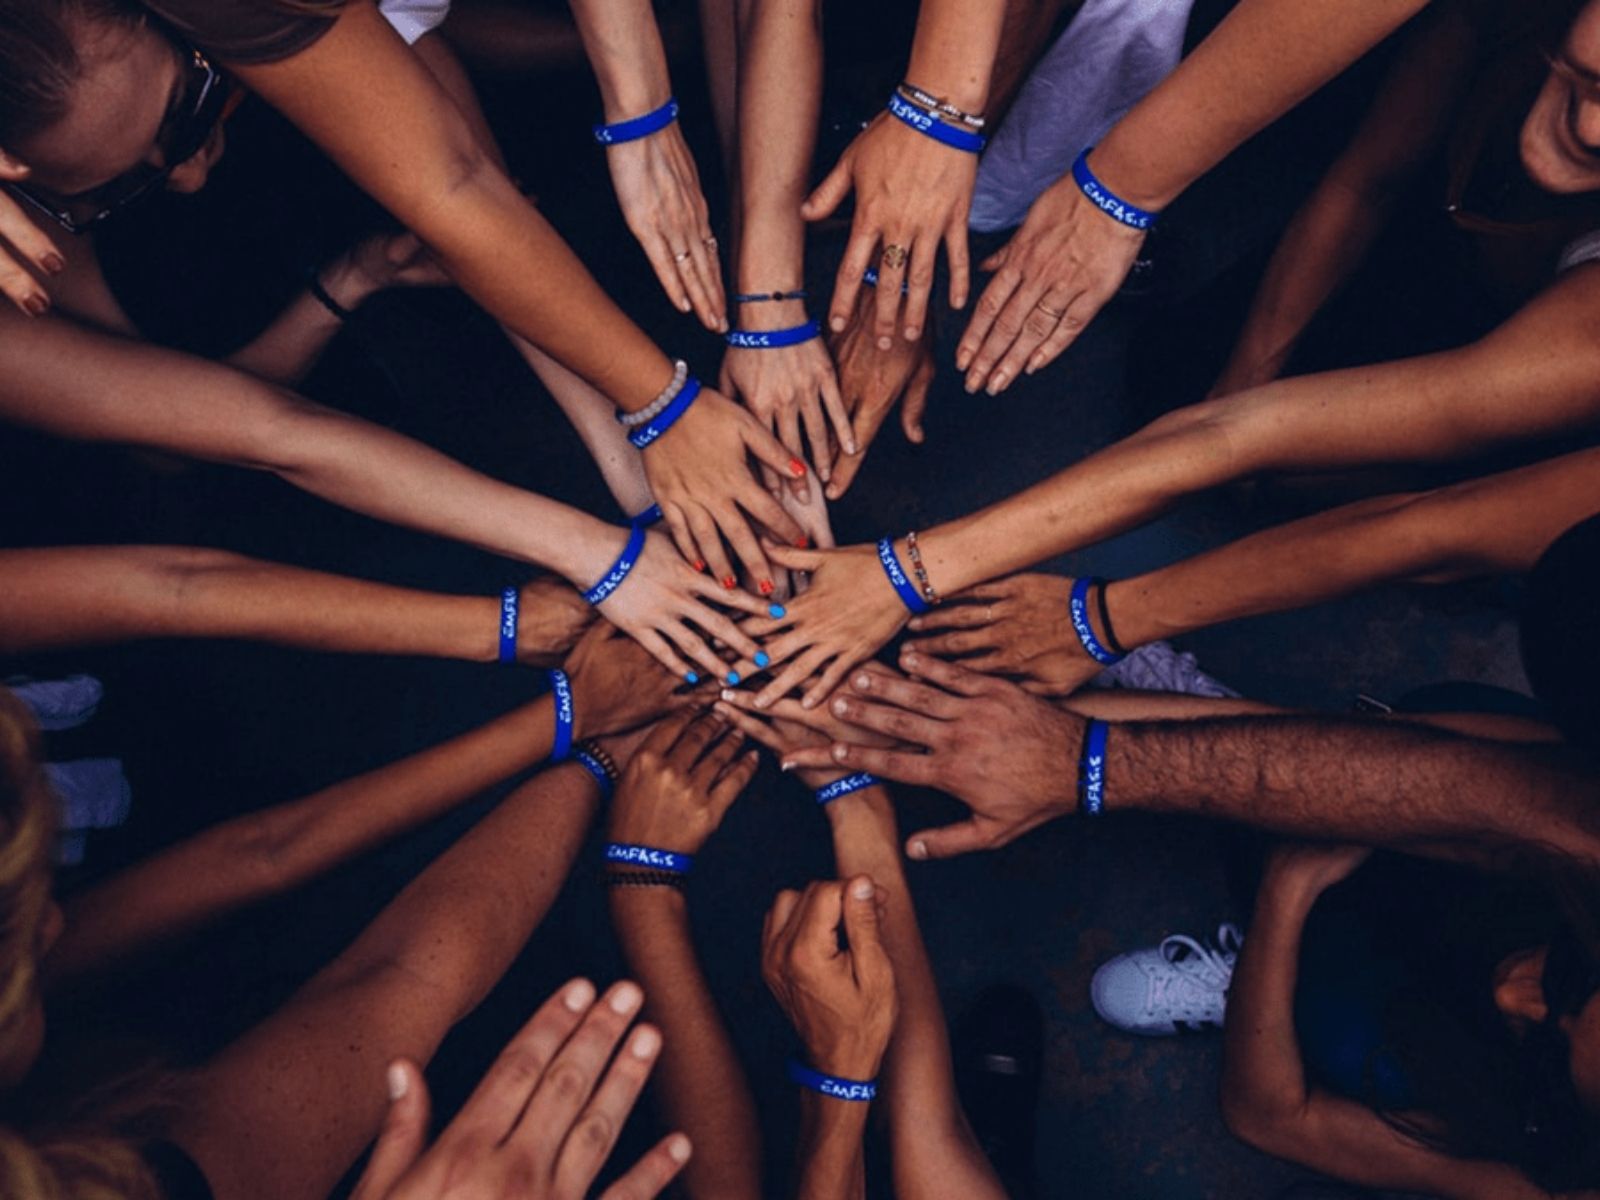 A Group of people putting their hands together